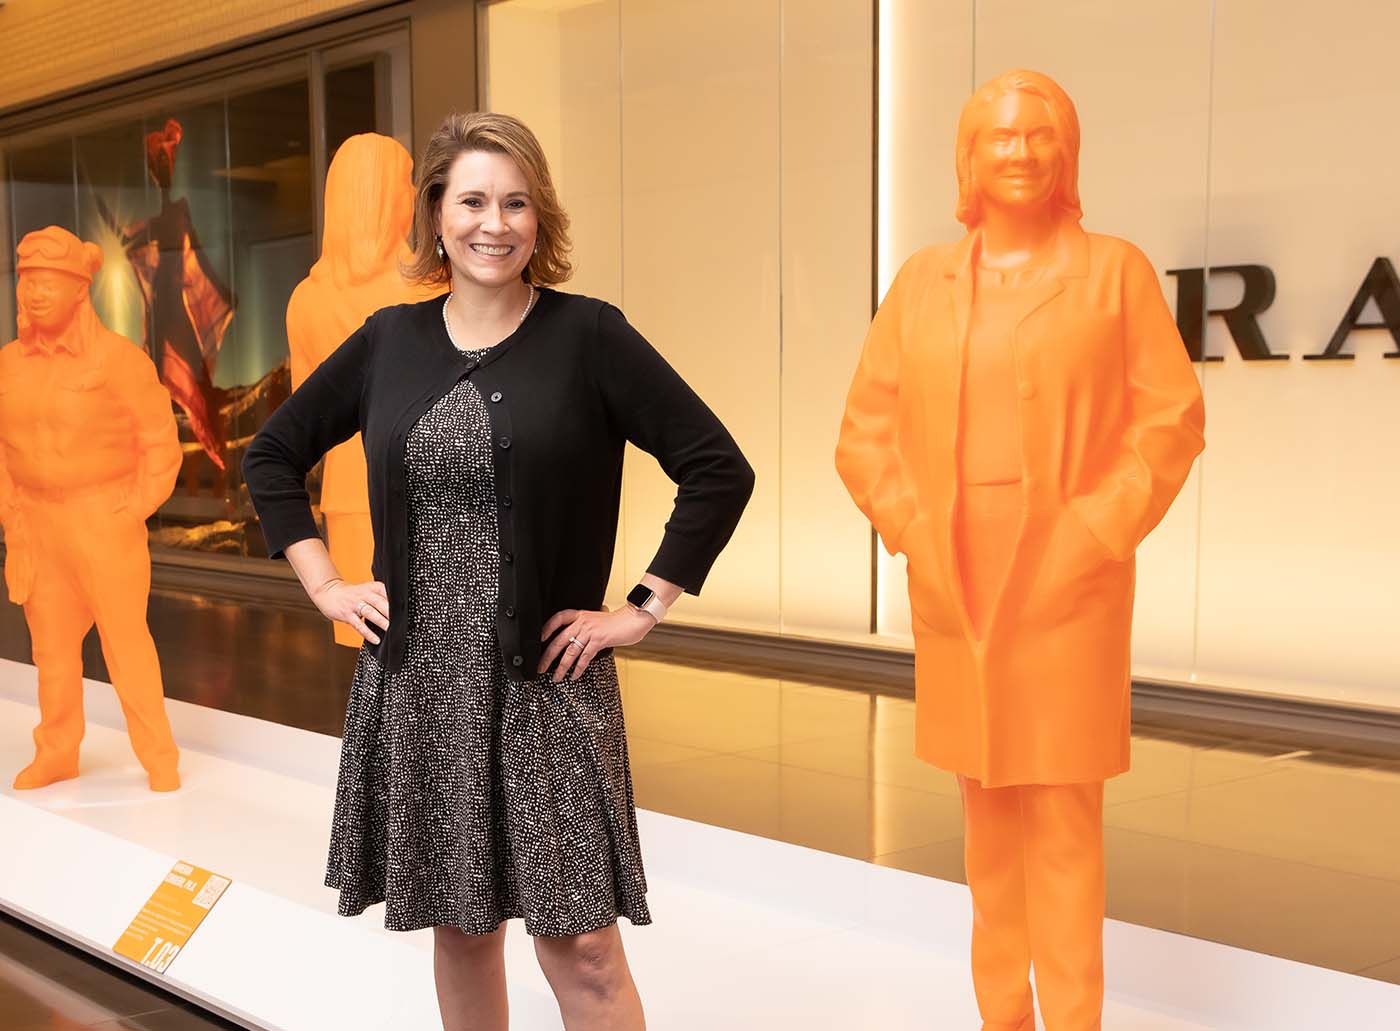 Woman in black jacket and spotted dress standing next to statue of herself